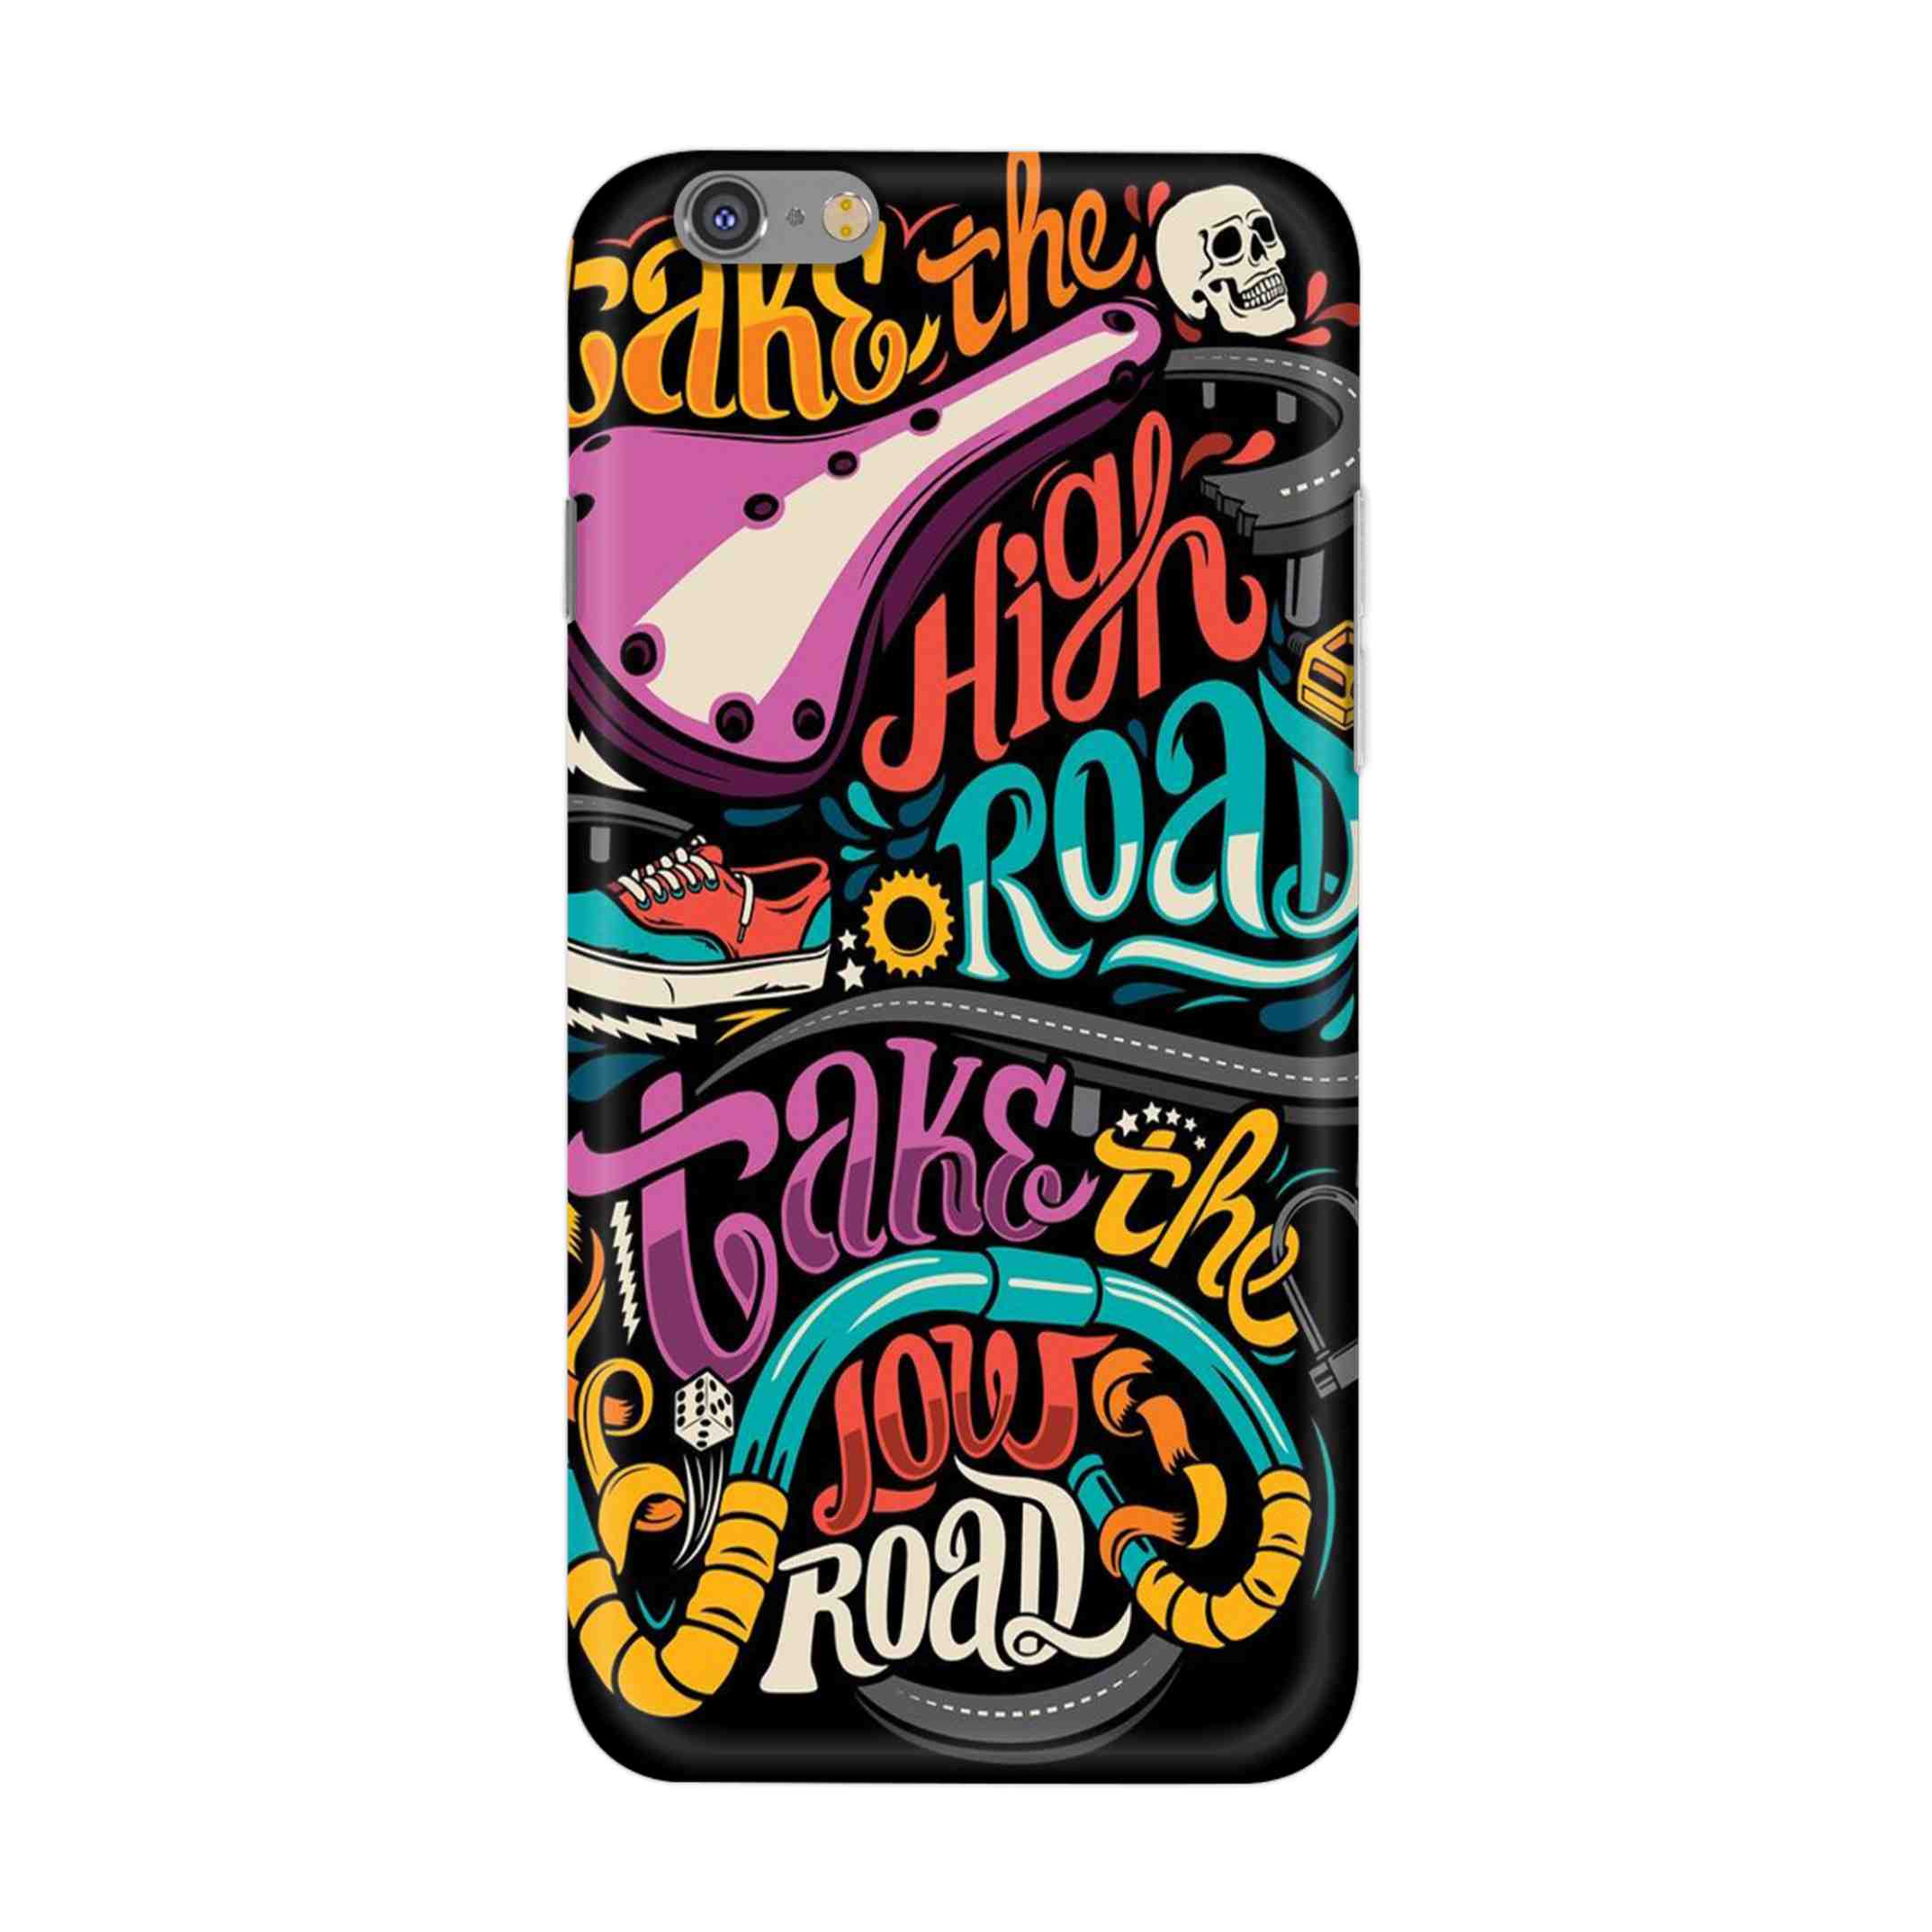 Buy Take The High Road Hard Back Mobile Phone Case/Cover For iPhone 6 / 6s Online